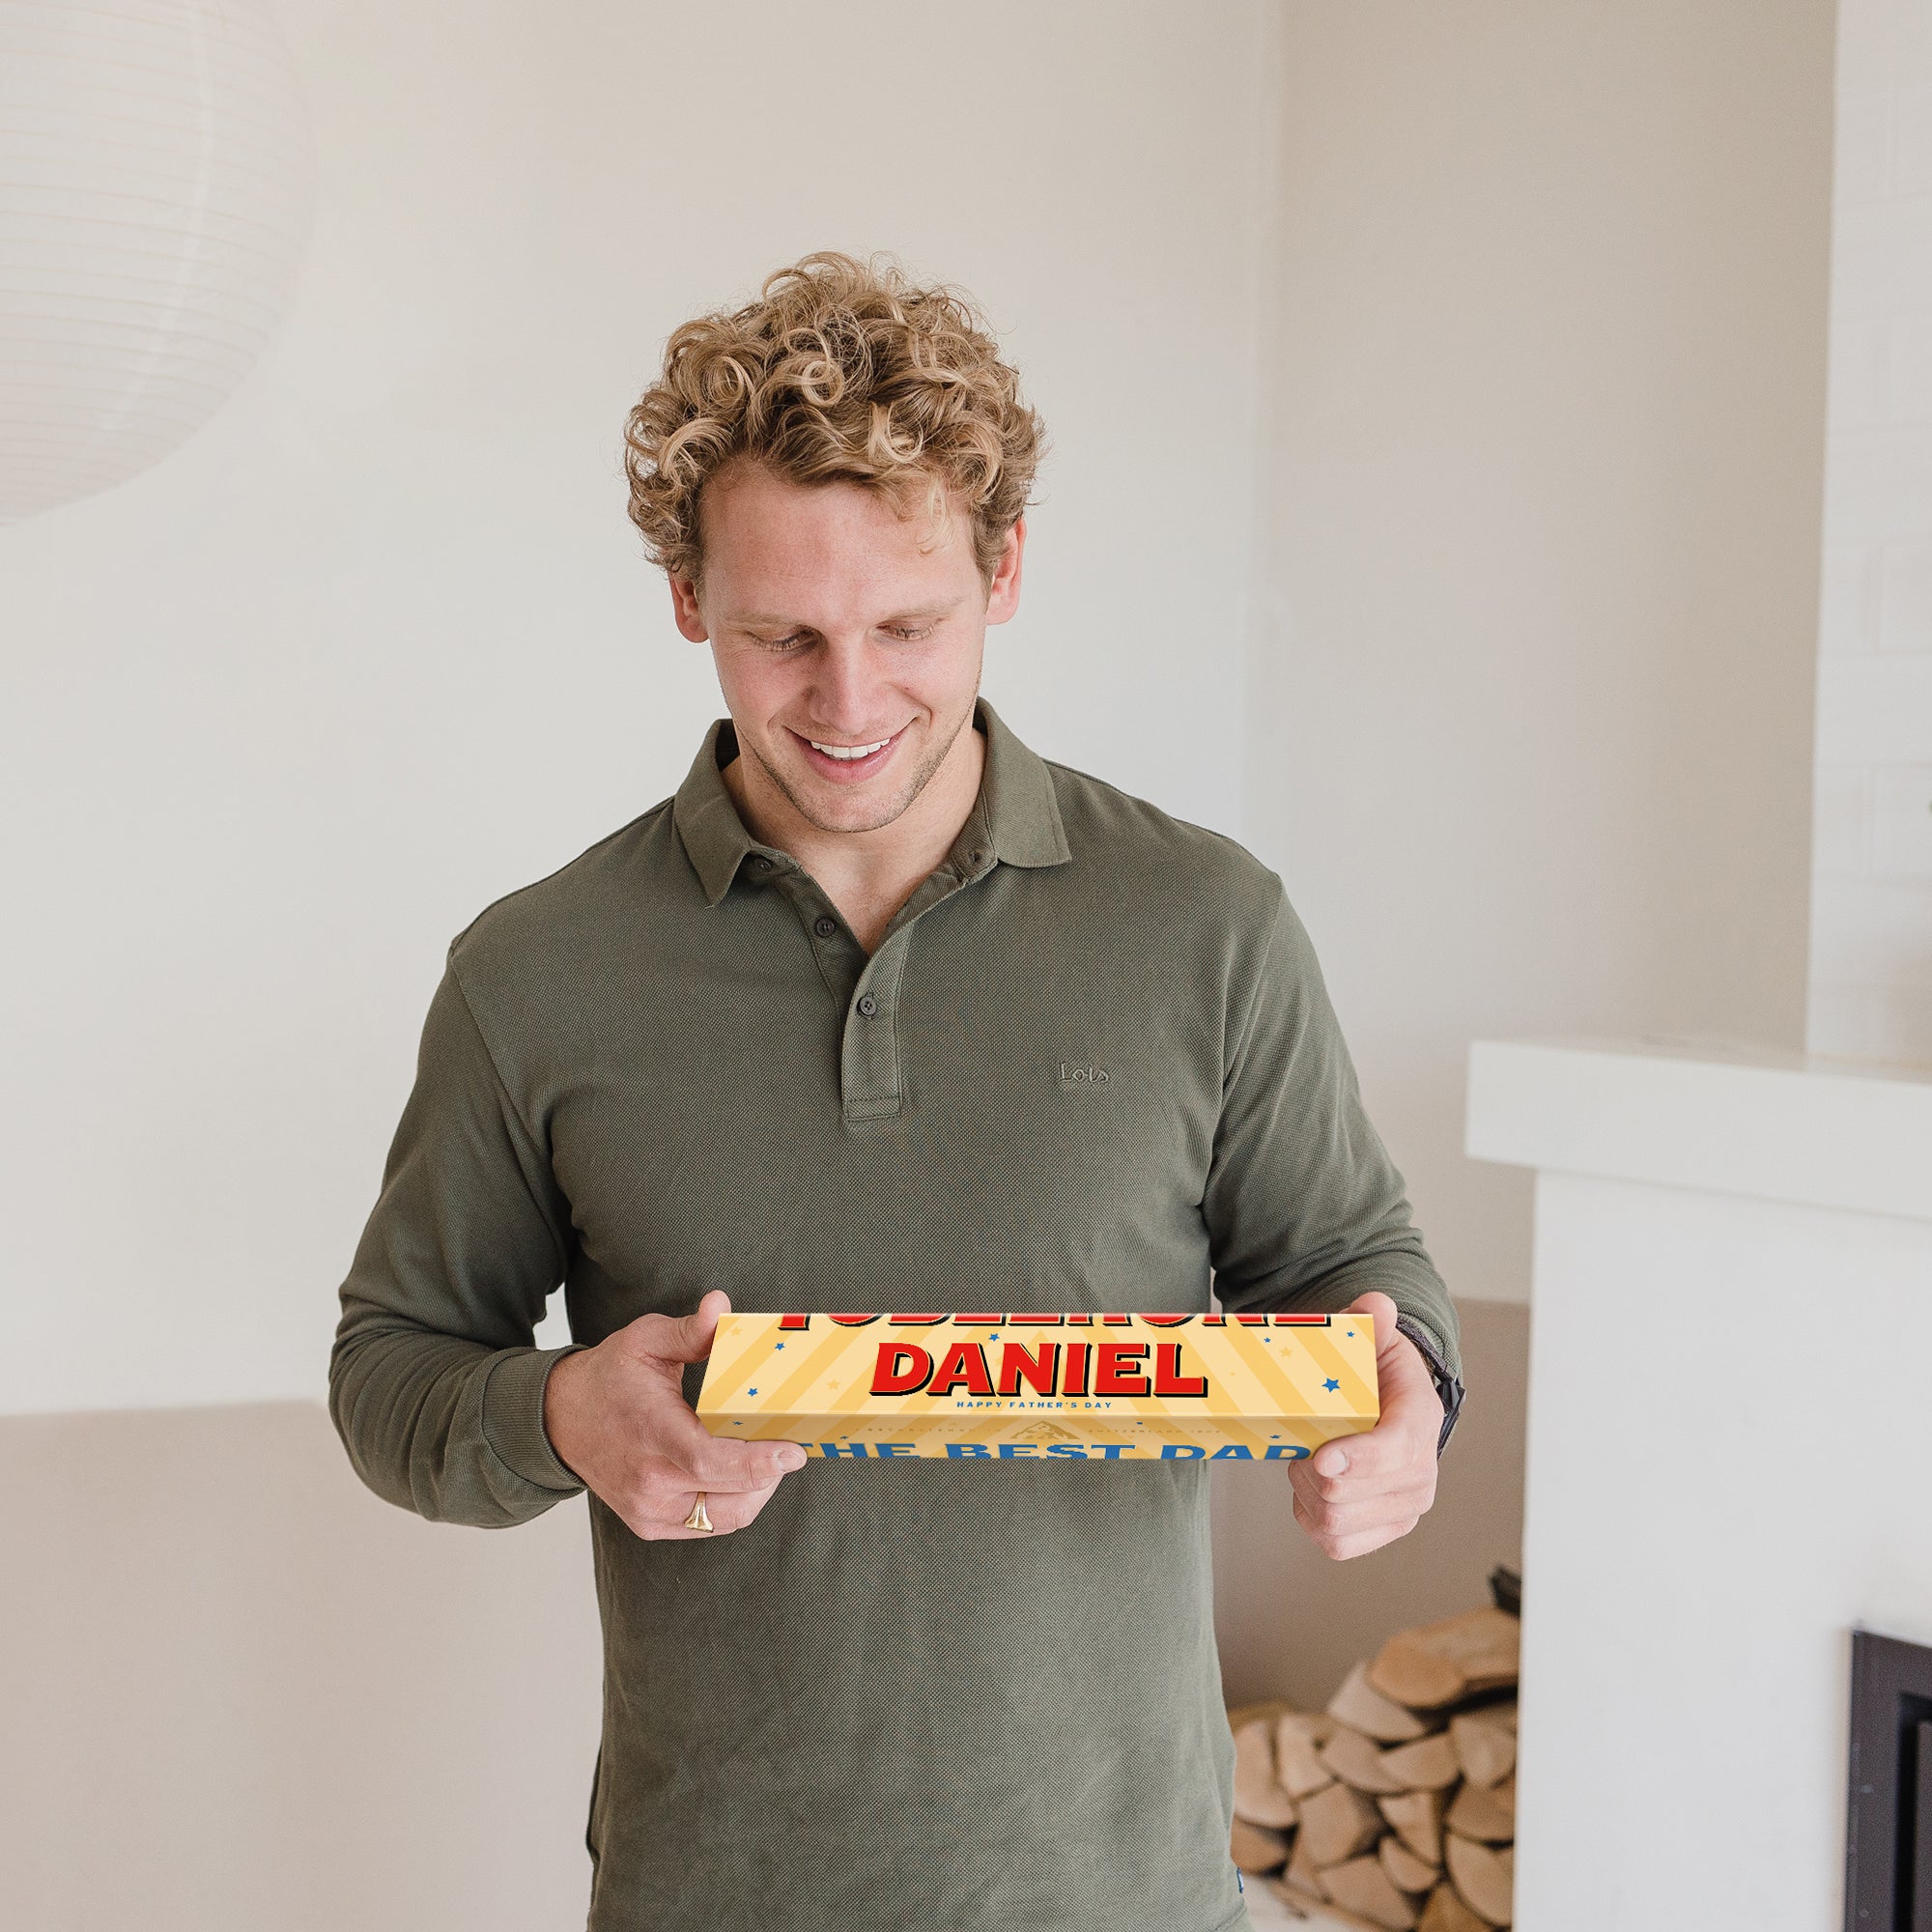 Personalised Toblerone bar - Large - Father's Day